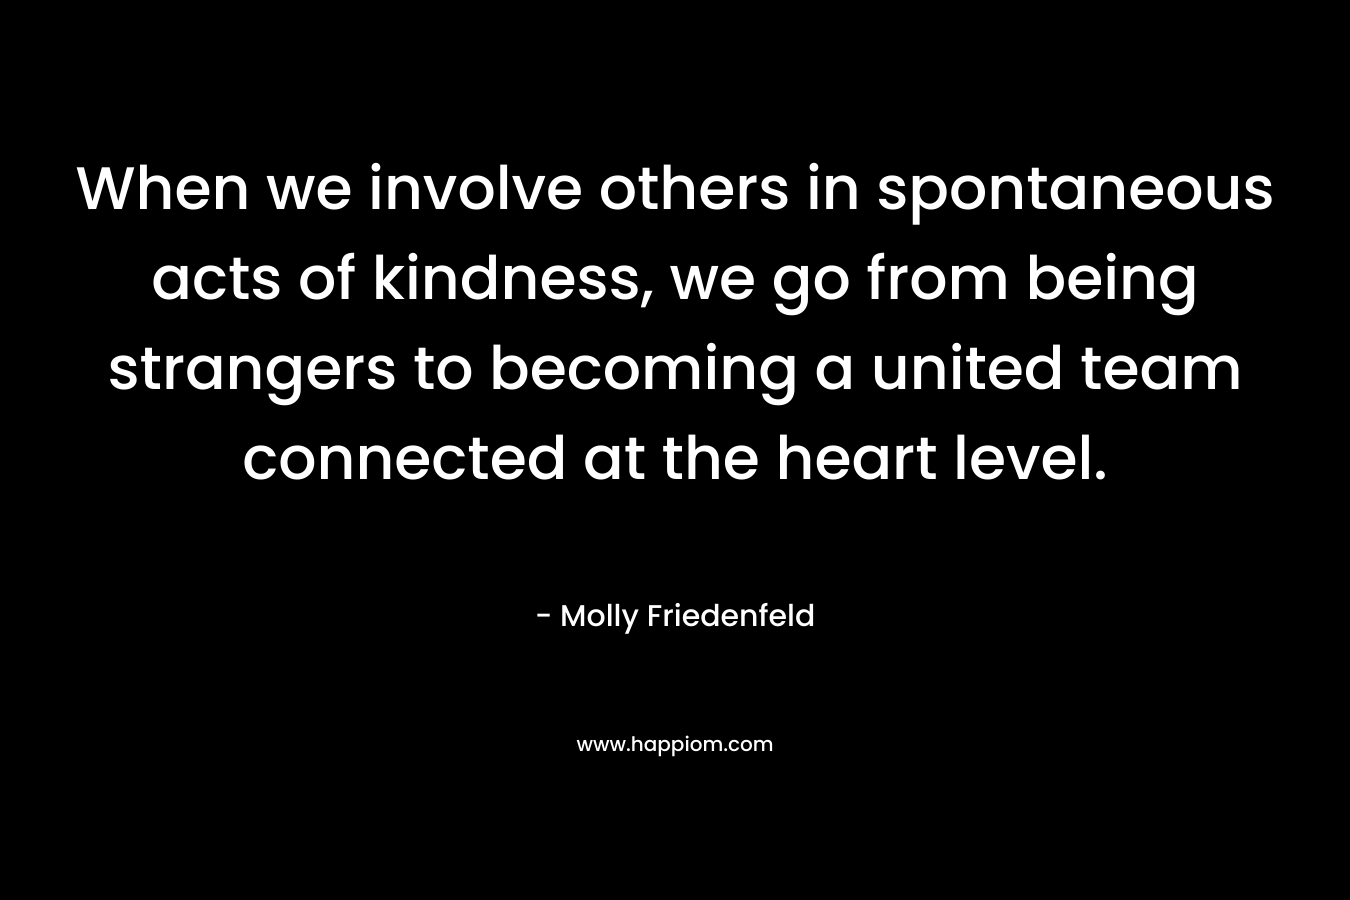 When we involve others in spontaneous acts of kindness, we go from being strangers to becoming a united team connected at the heart level. – Molly Friedenfeld